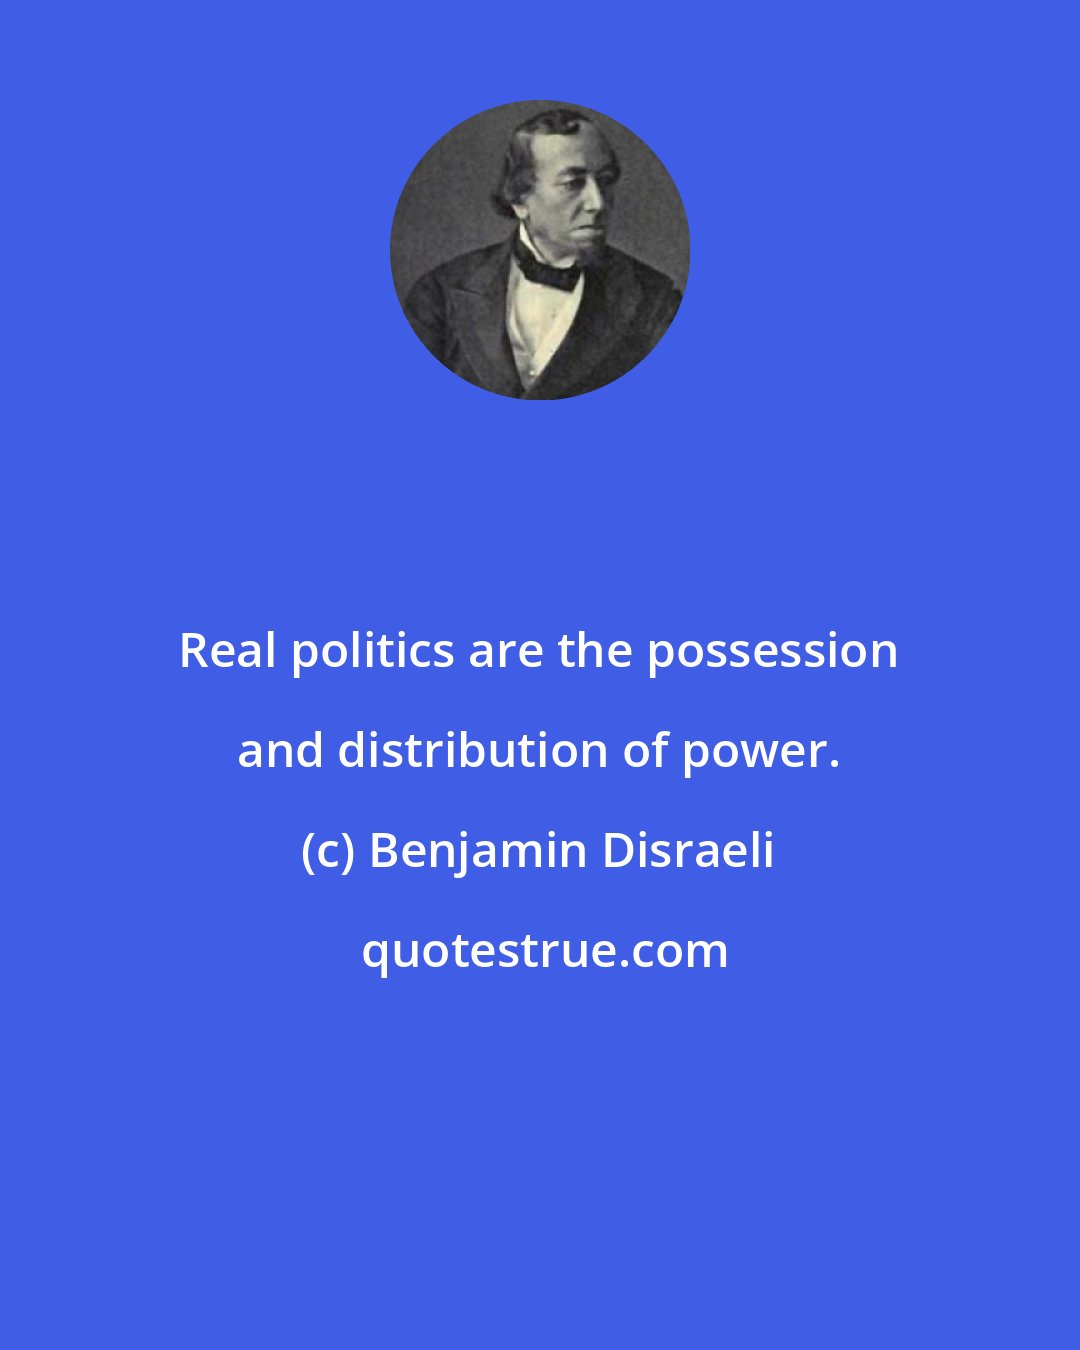 Benjamin Disraeli: Real politics are the possession and distribution of power.